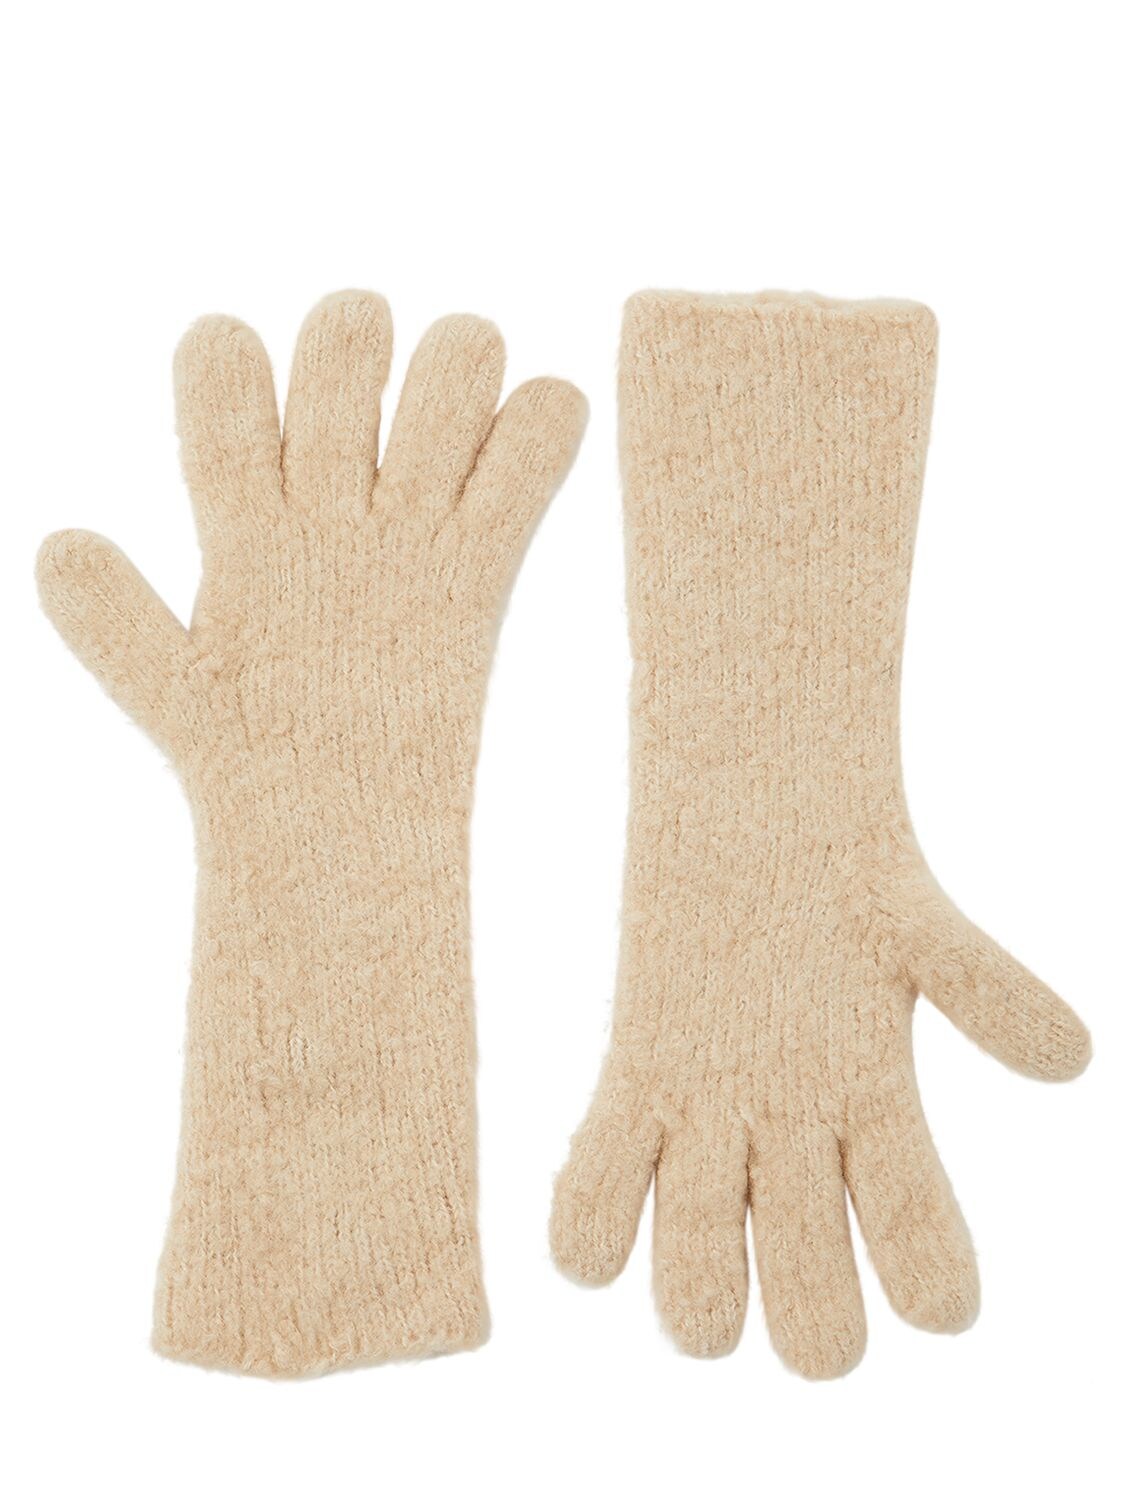 Monte Bianco Long Cashmere Gloves